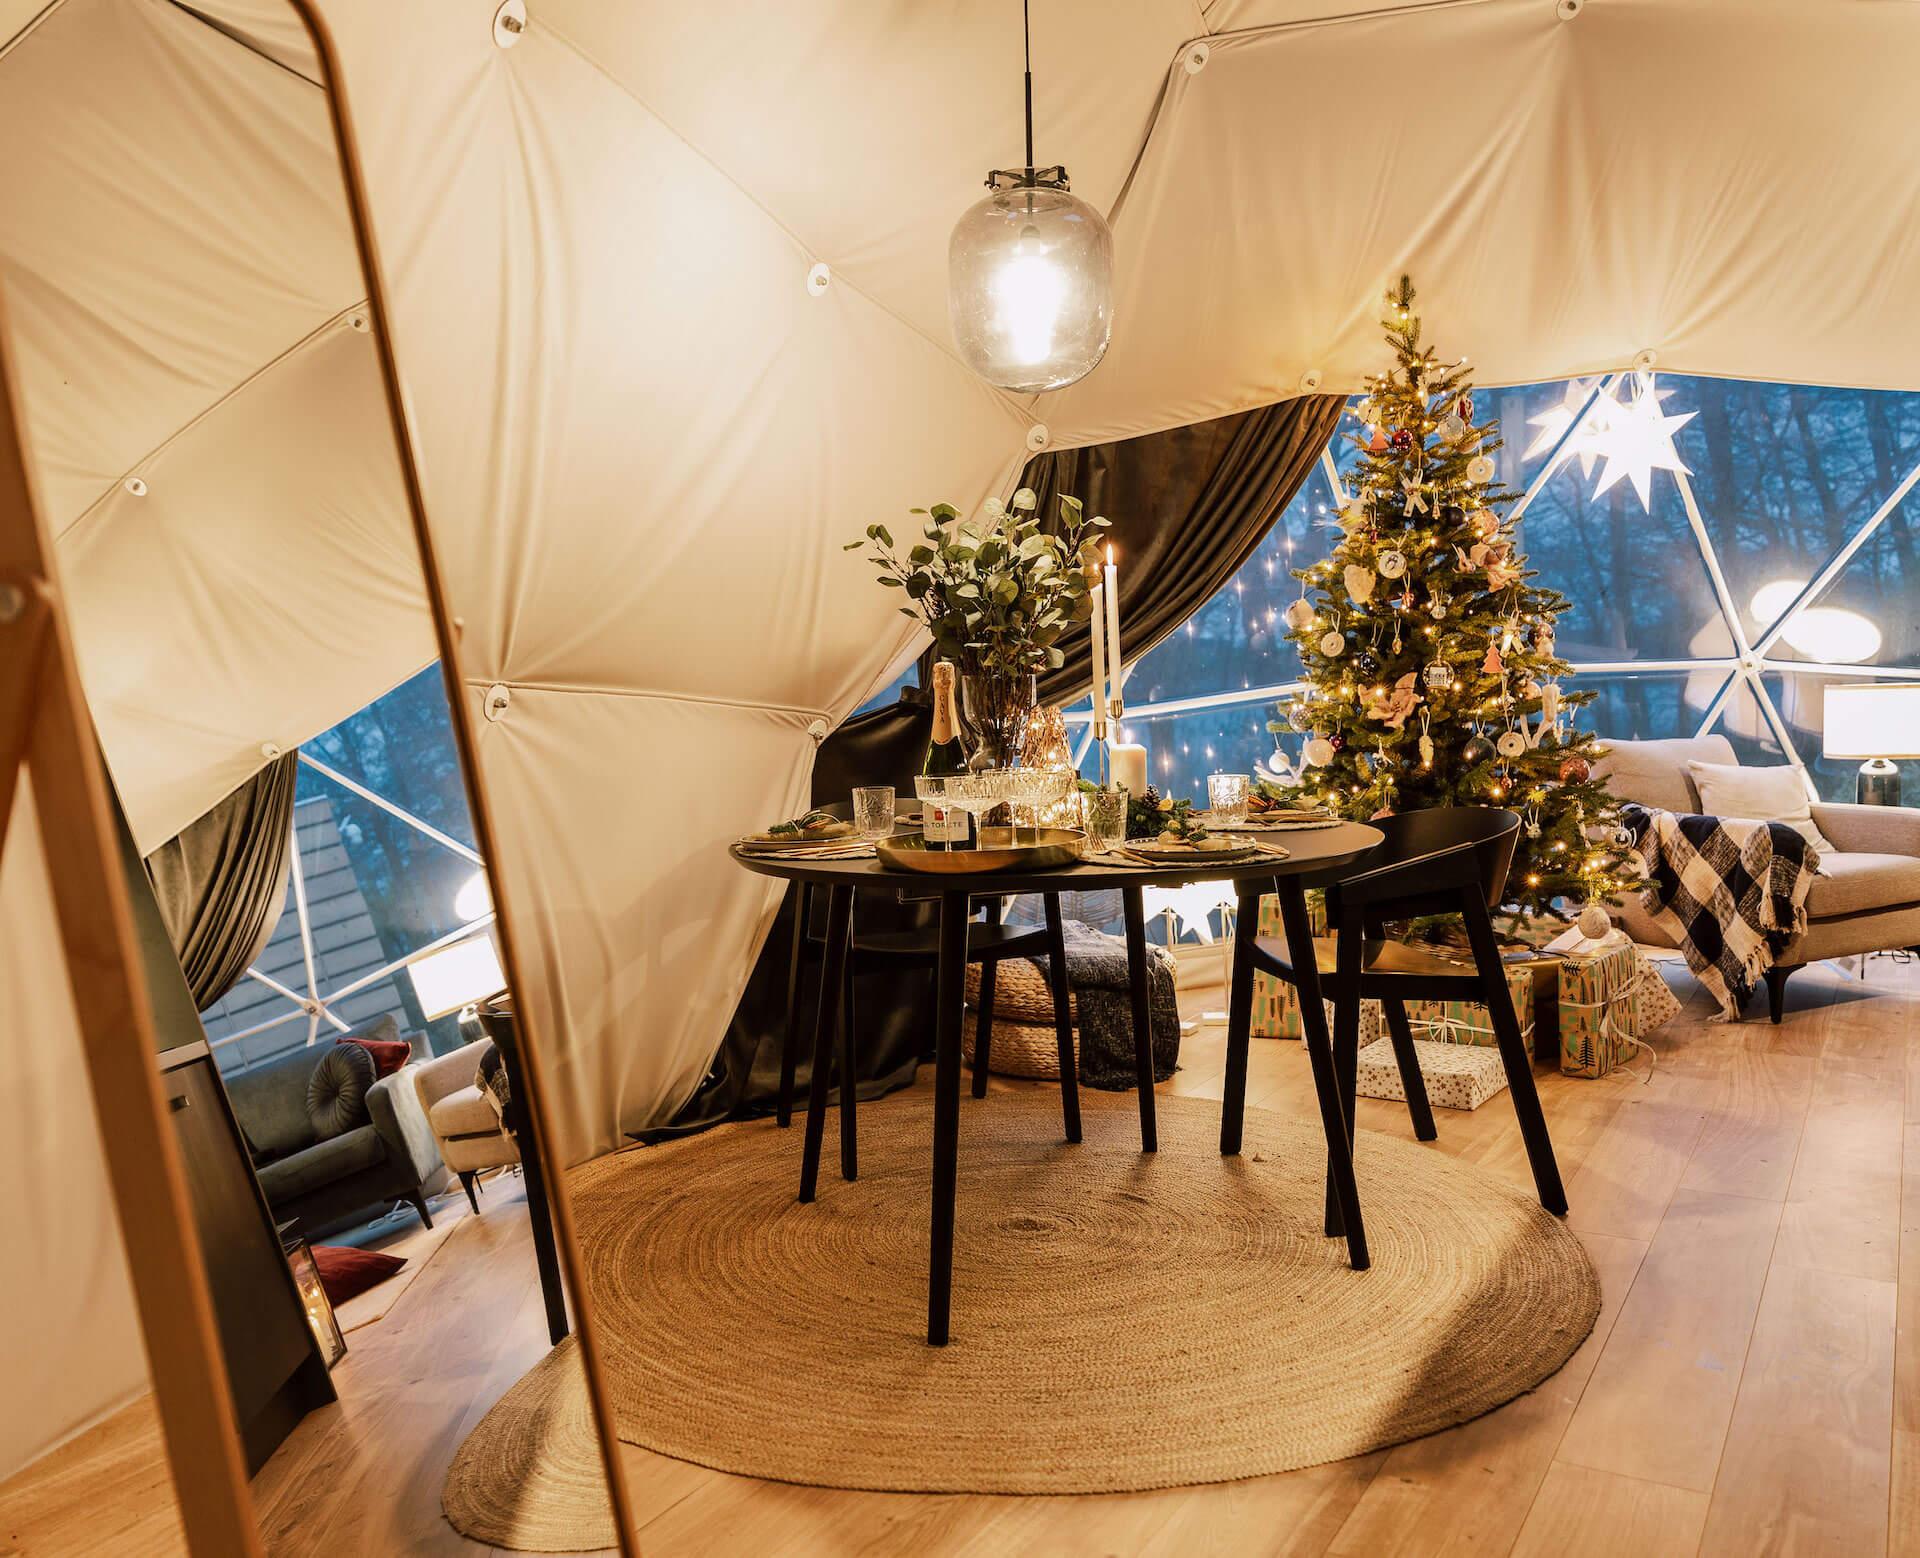 Decorating geodesic dome for the Holiday Season